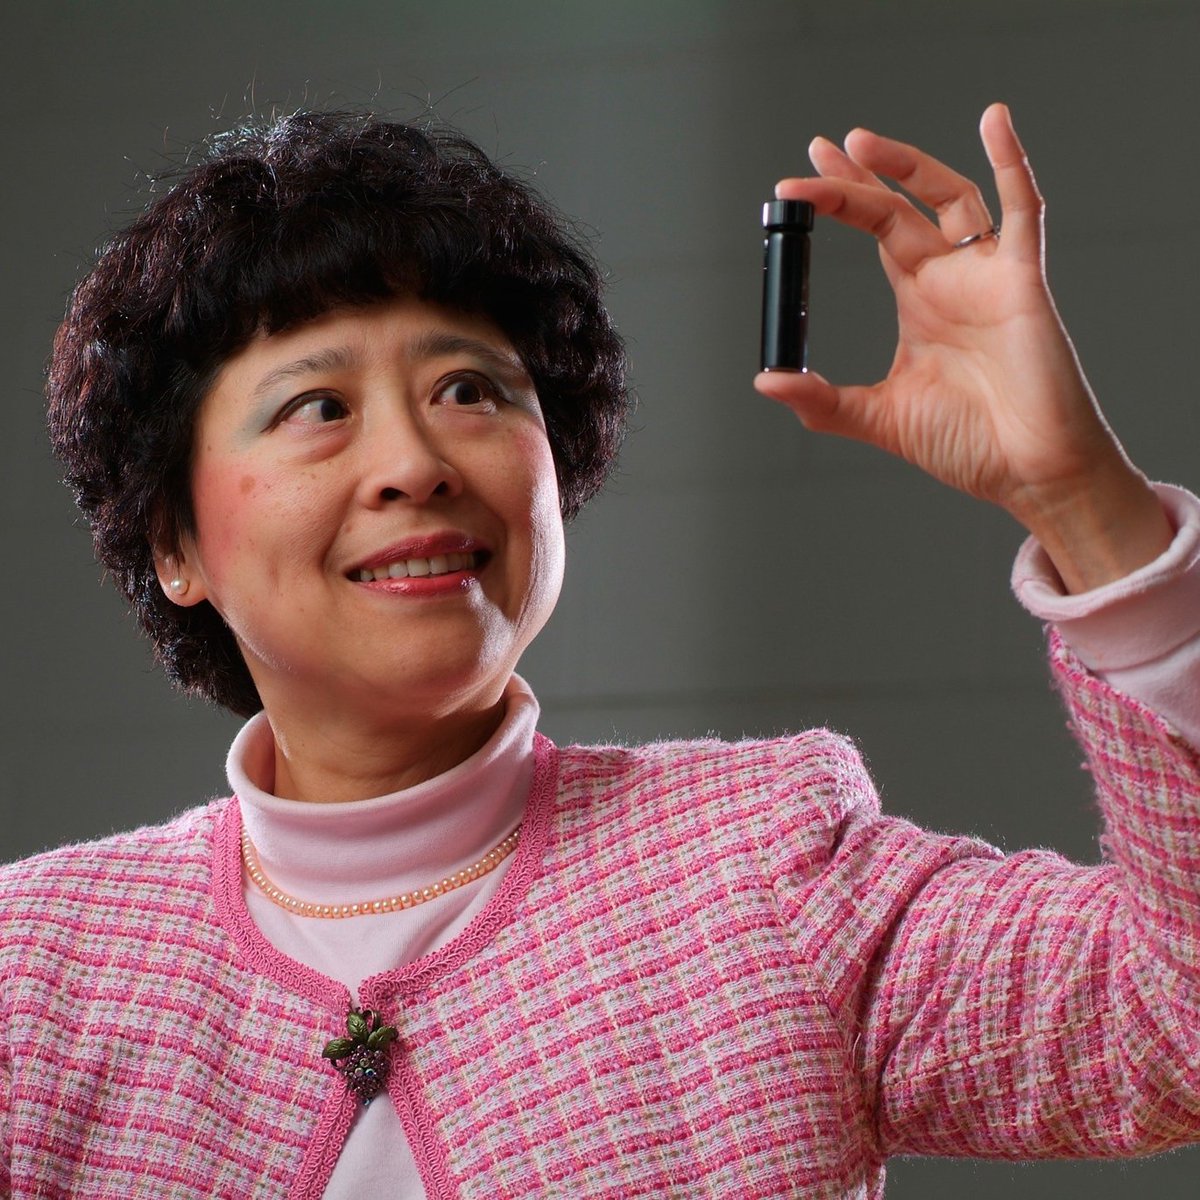 Deborah Chung of @UBengineering recalls upbringing in Hong Kong, amorphous materials @Caltech, the greatness of Millie Dresselhaus @ScienceMIT, shift to applications @CmuScience, building the Composite Materials Lab, and the origins of Smart Concrete heritageproject.caltech.edu/interviews-upd…